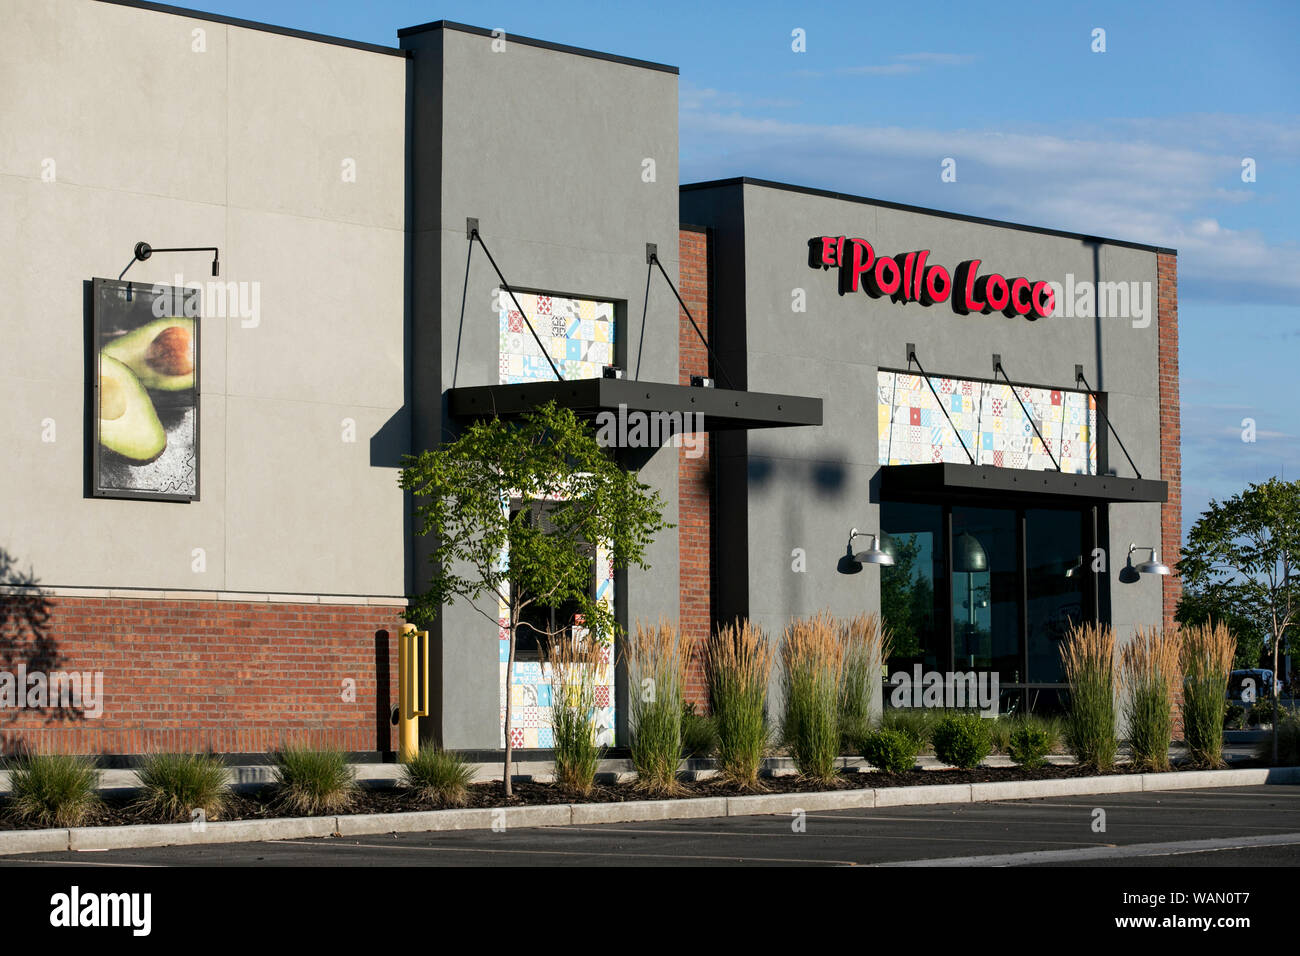 A logo sign outside of a El Pollo Loco fast food restaurant location in Orem, Utah on July 29, 2019. Stock Photo